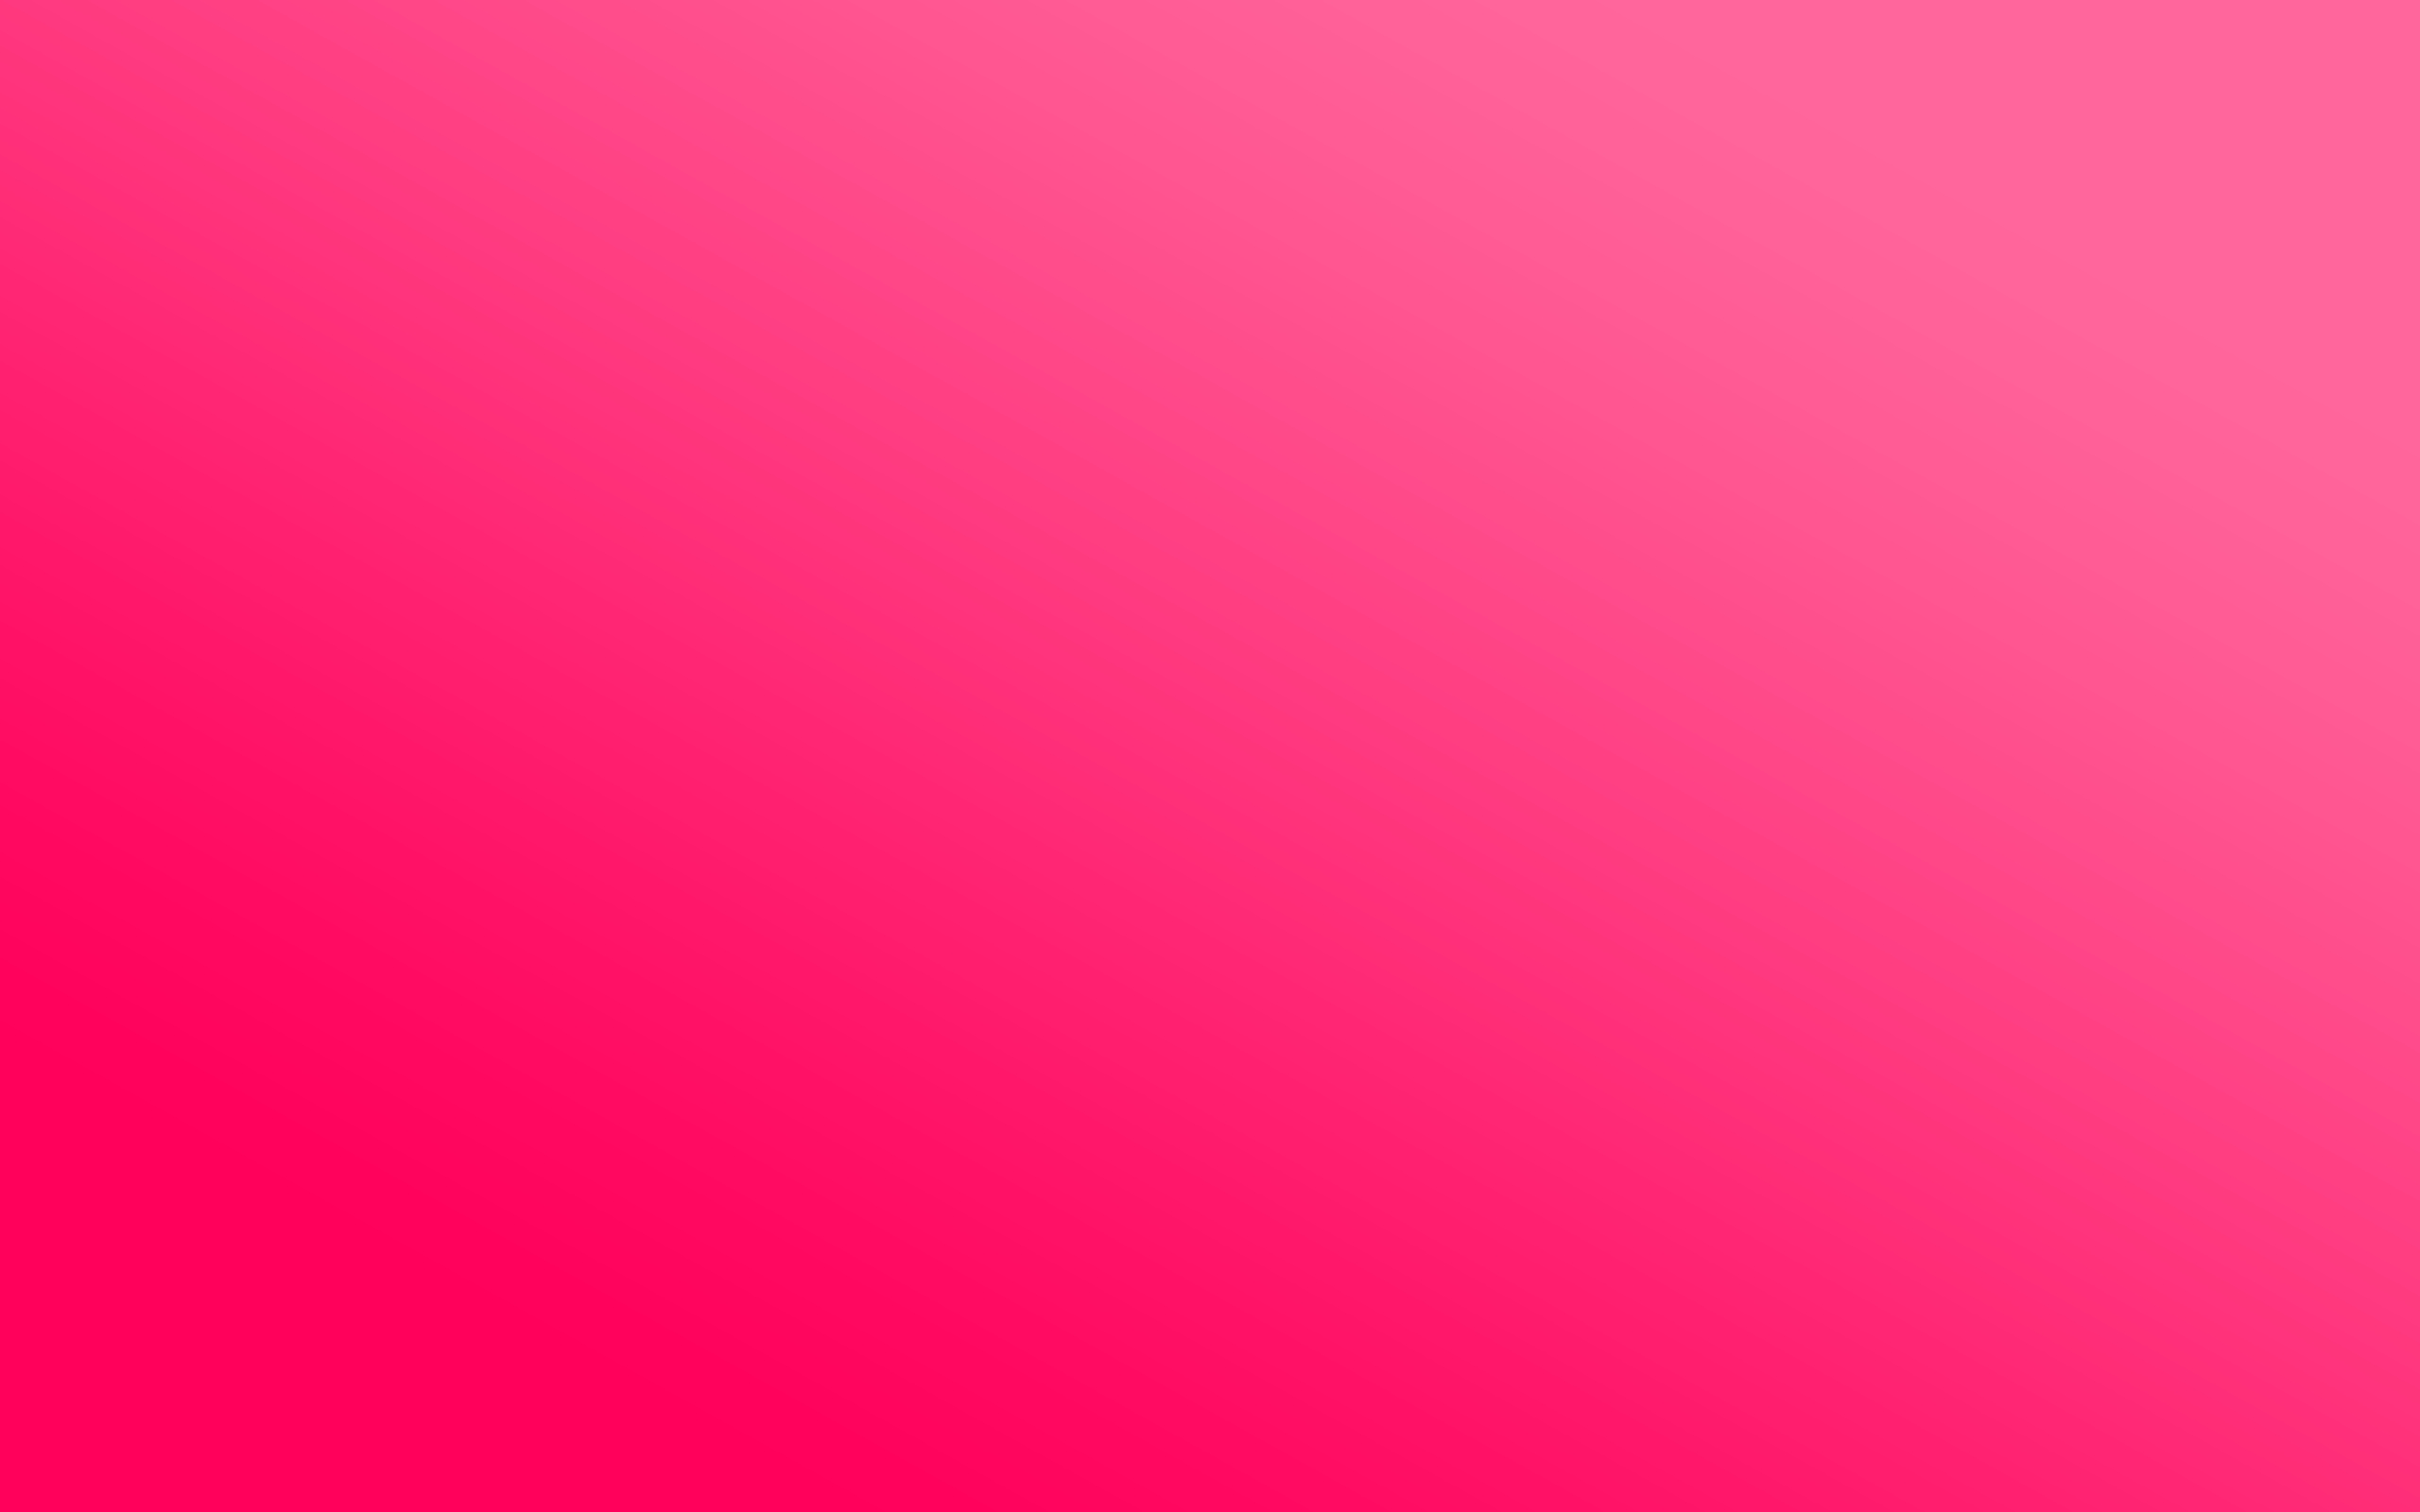  Pink Solid Color Gradient Bright Light Wallpaper Wallpapers Byte